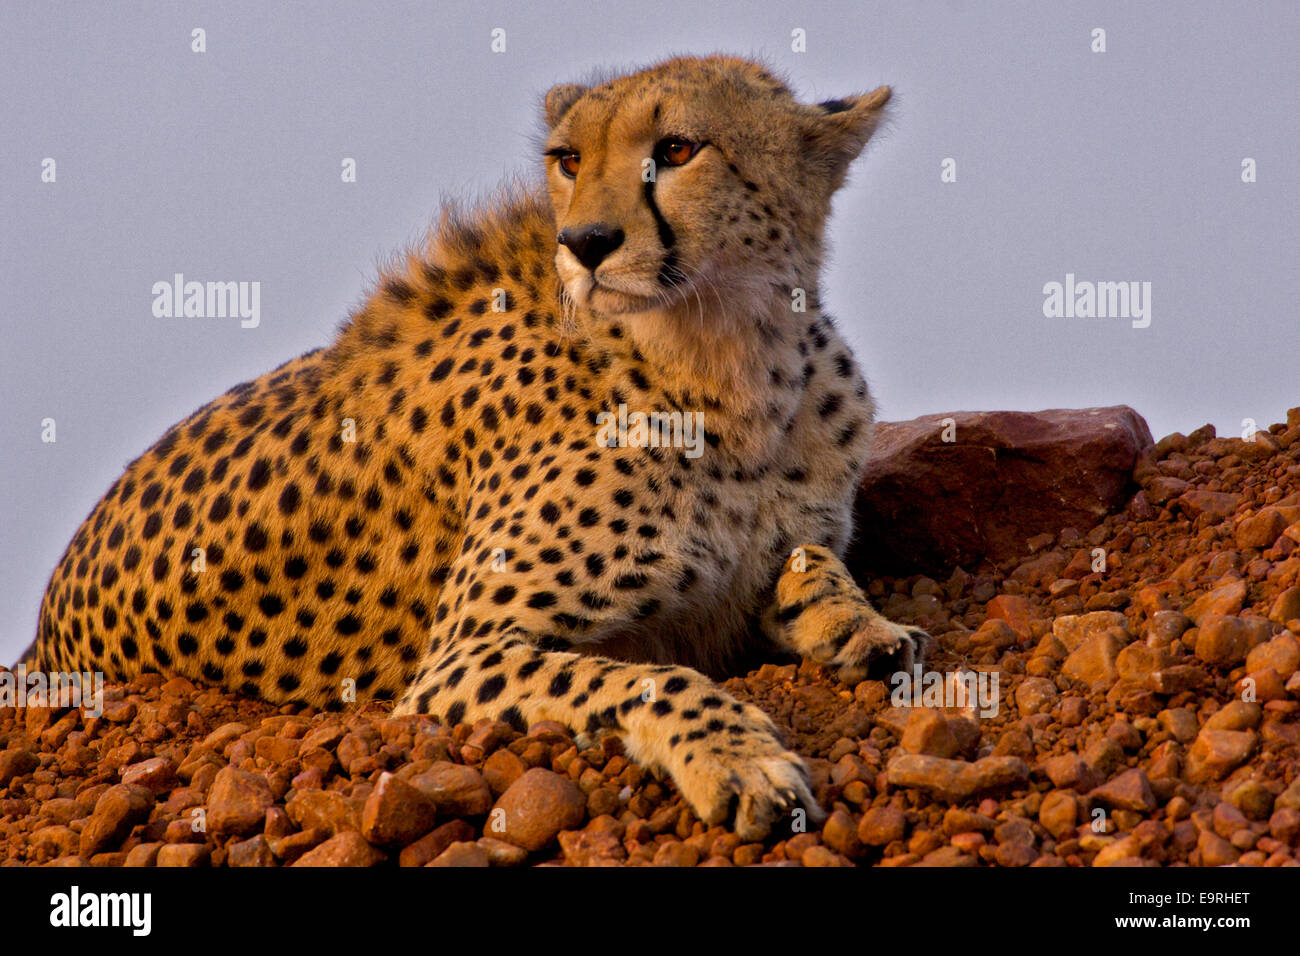 Cheetah (Acinonyx jubatus)   A superb portrait of a cheetah in its prime, lying on a mound, checking the horizon, in search of p Stock Photo